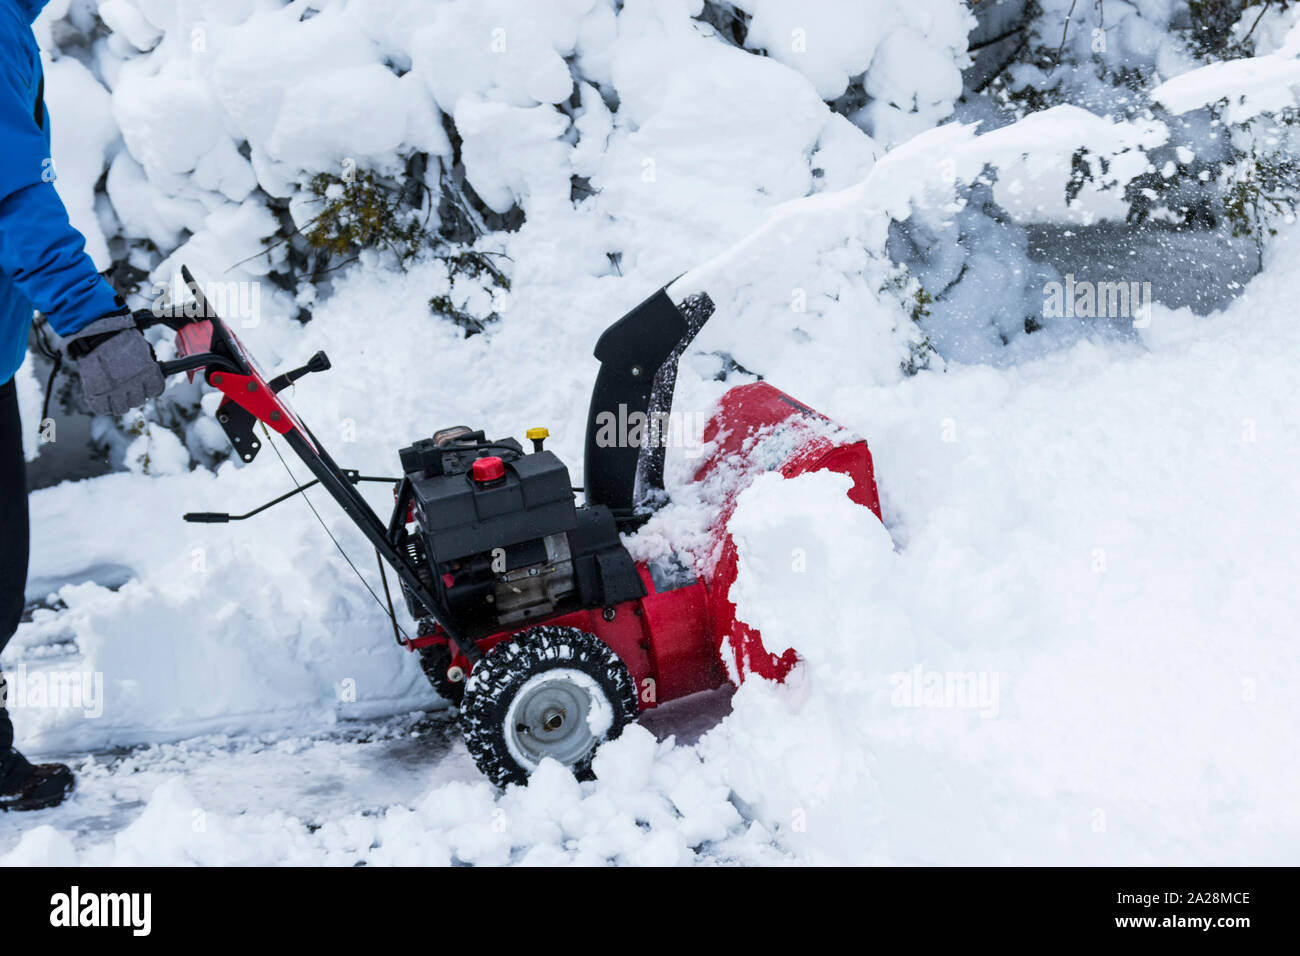 https://c8.alamy.com/comp/2A28MCE/a-young-man-is-clearing-his-neighbors-driveway-with-his-small-snow-blower-after-a-spring-snow-storm-2A28MCE.jpg